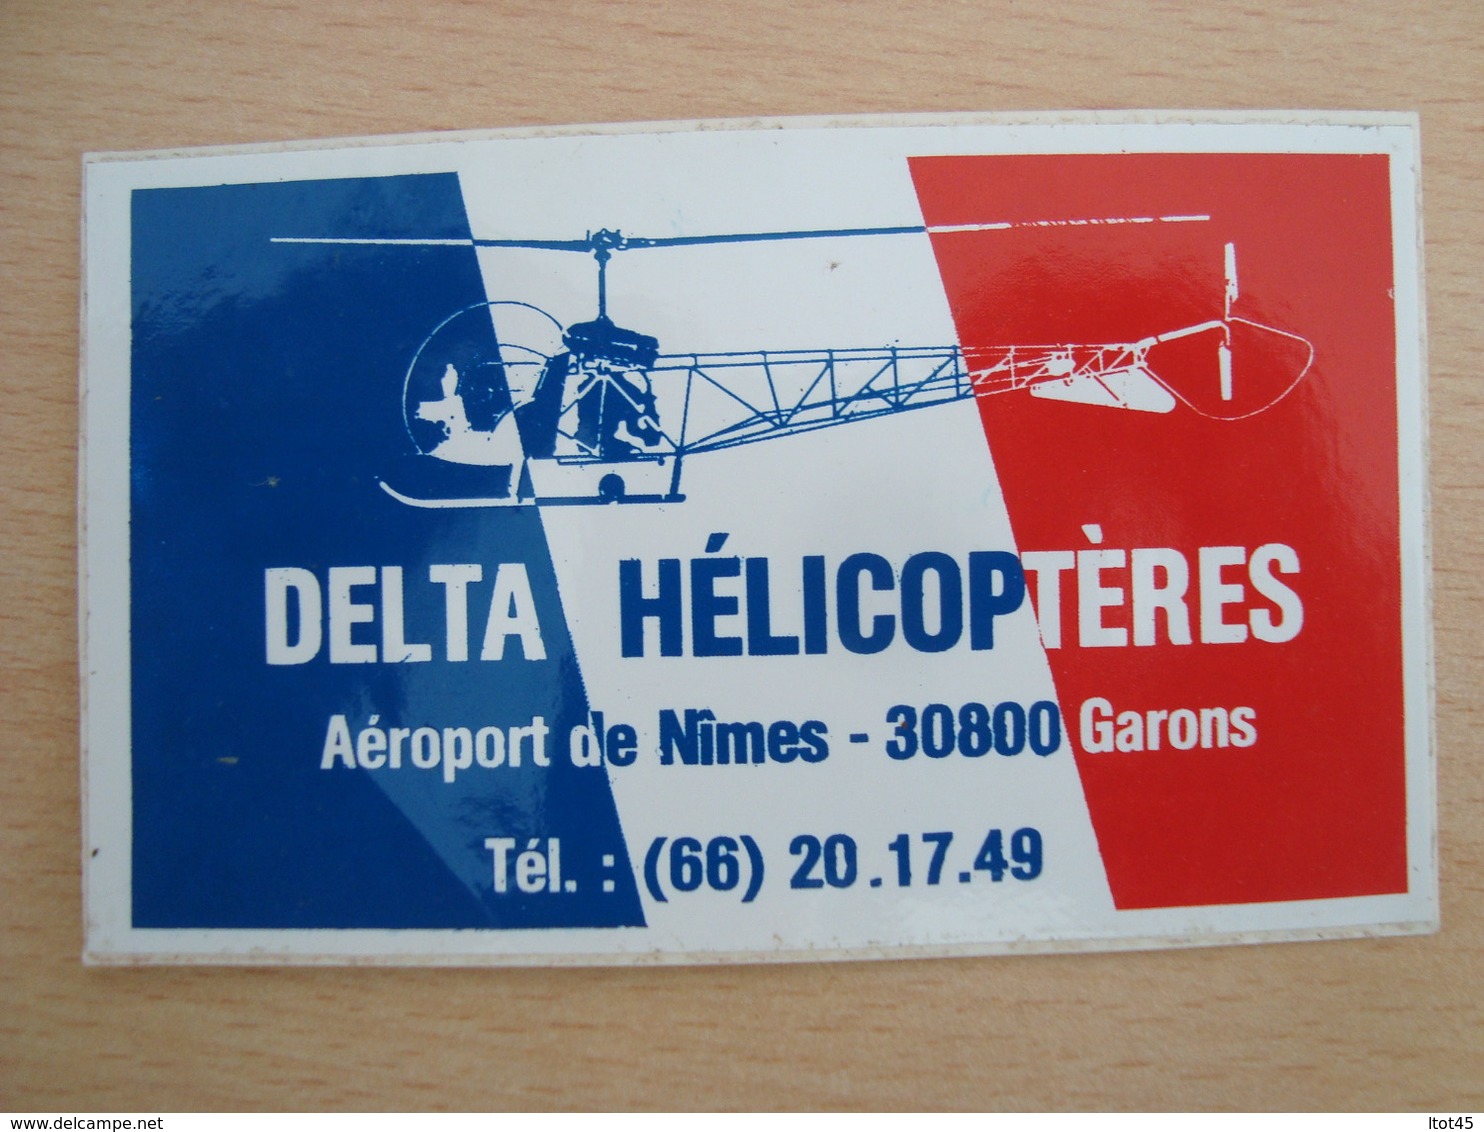 AUTOCOLLANT DELTA HELICOPTERES NIMES 30800 GARONS - Stickers